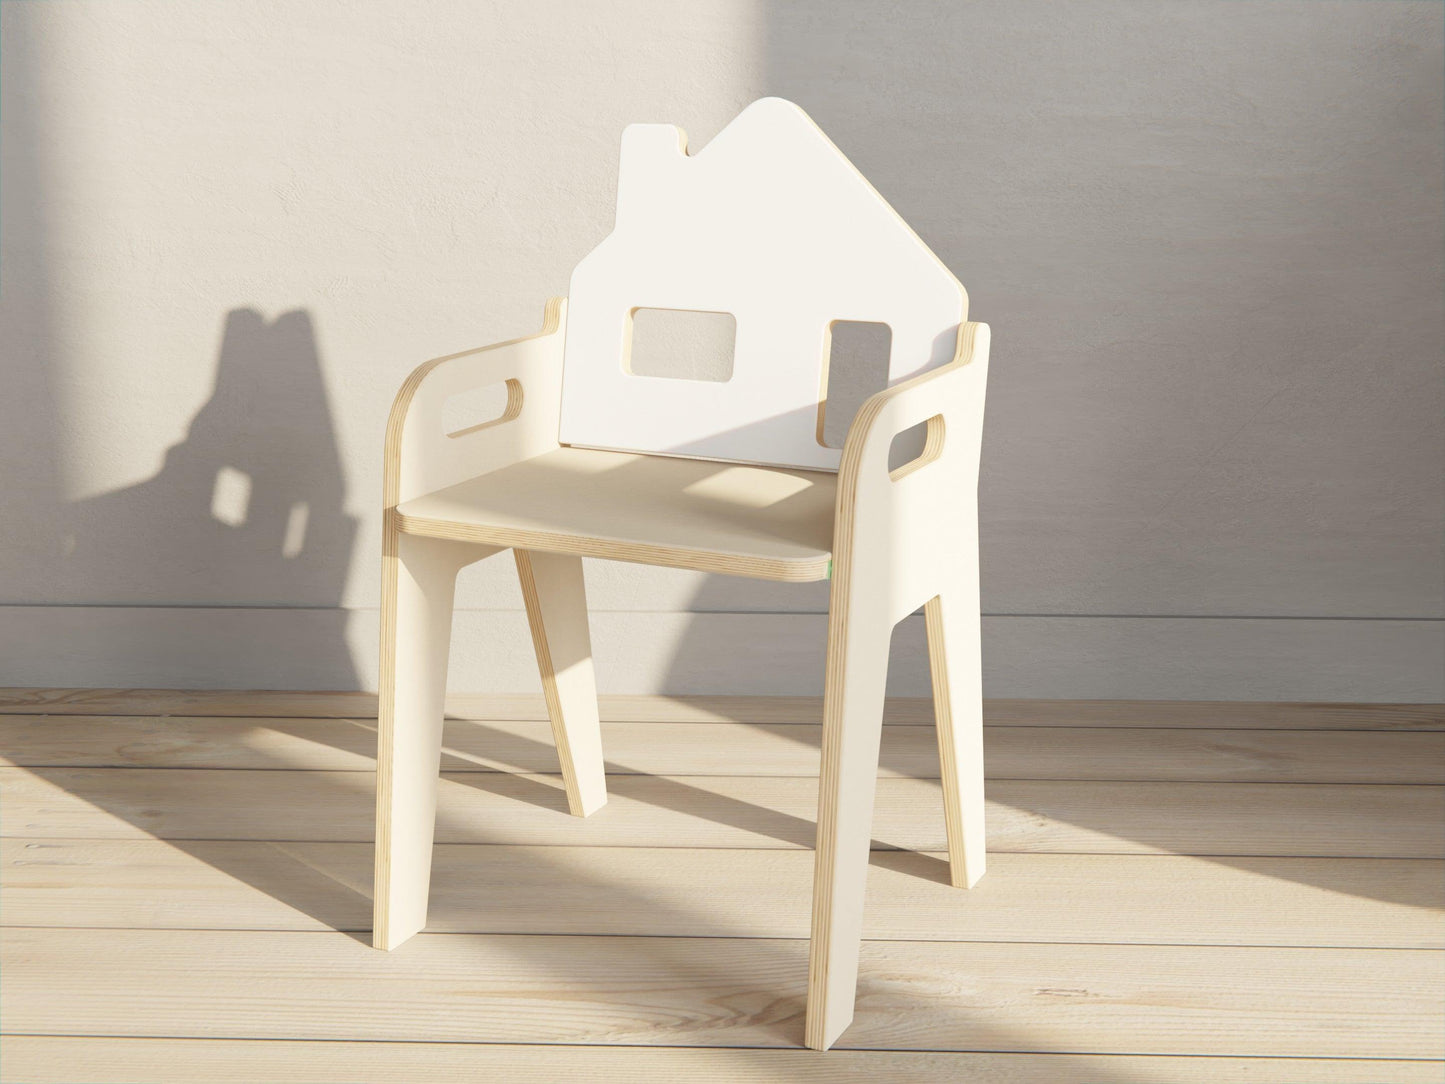 Wooden, durable, and adorable: Our White Kids Chair is perfect for 4-7 years old, 31cm tall.